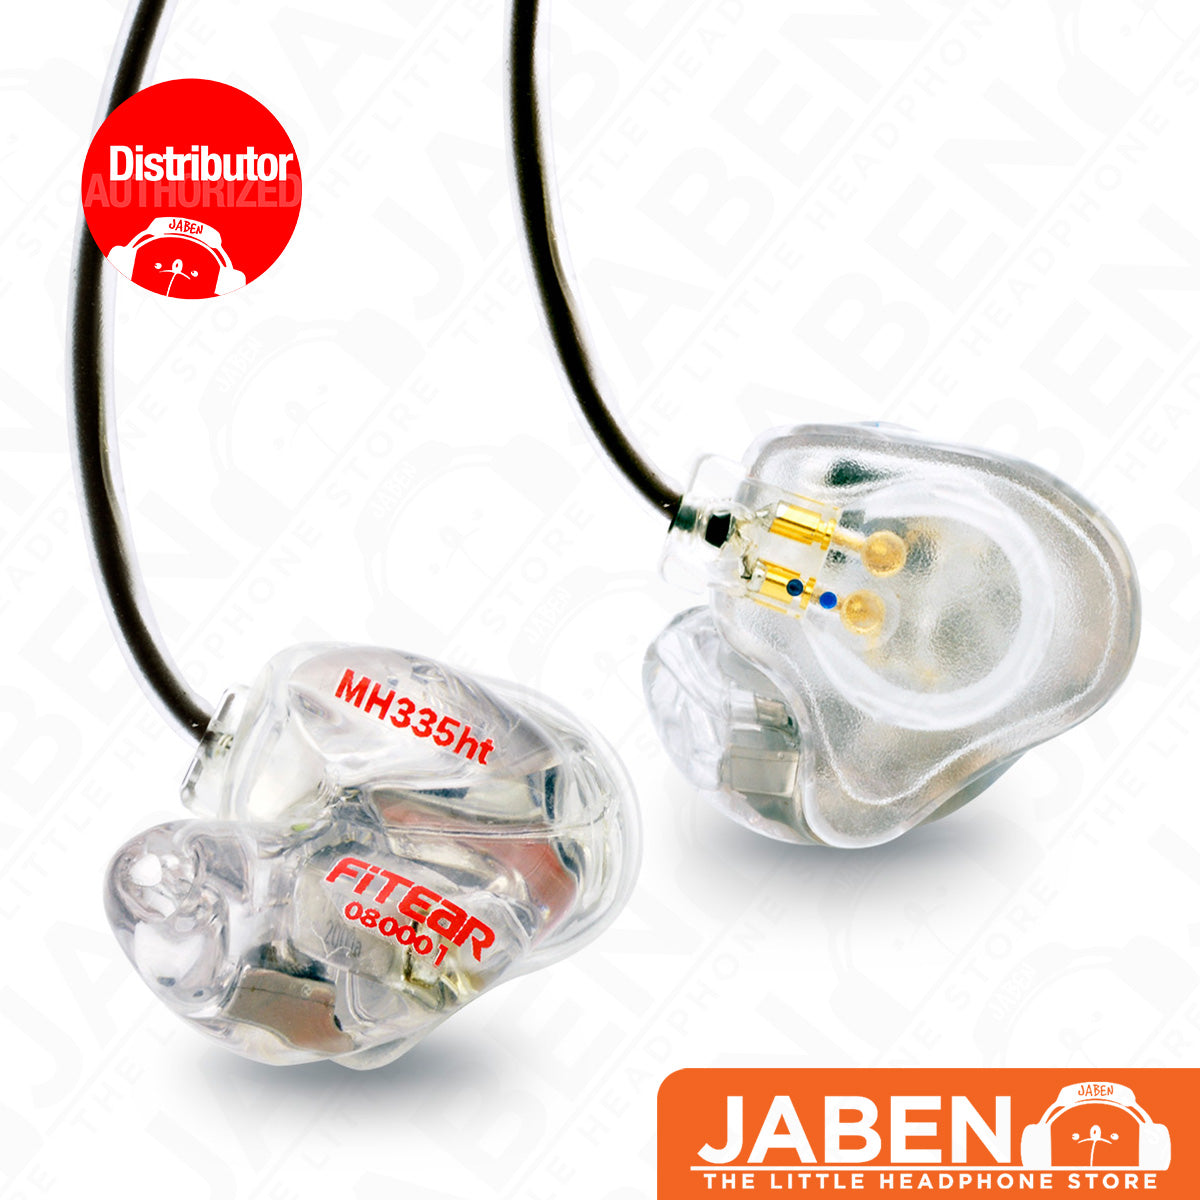 FitEar MH335ht